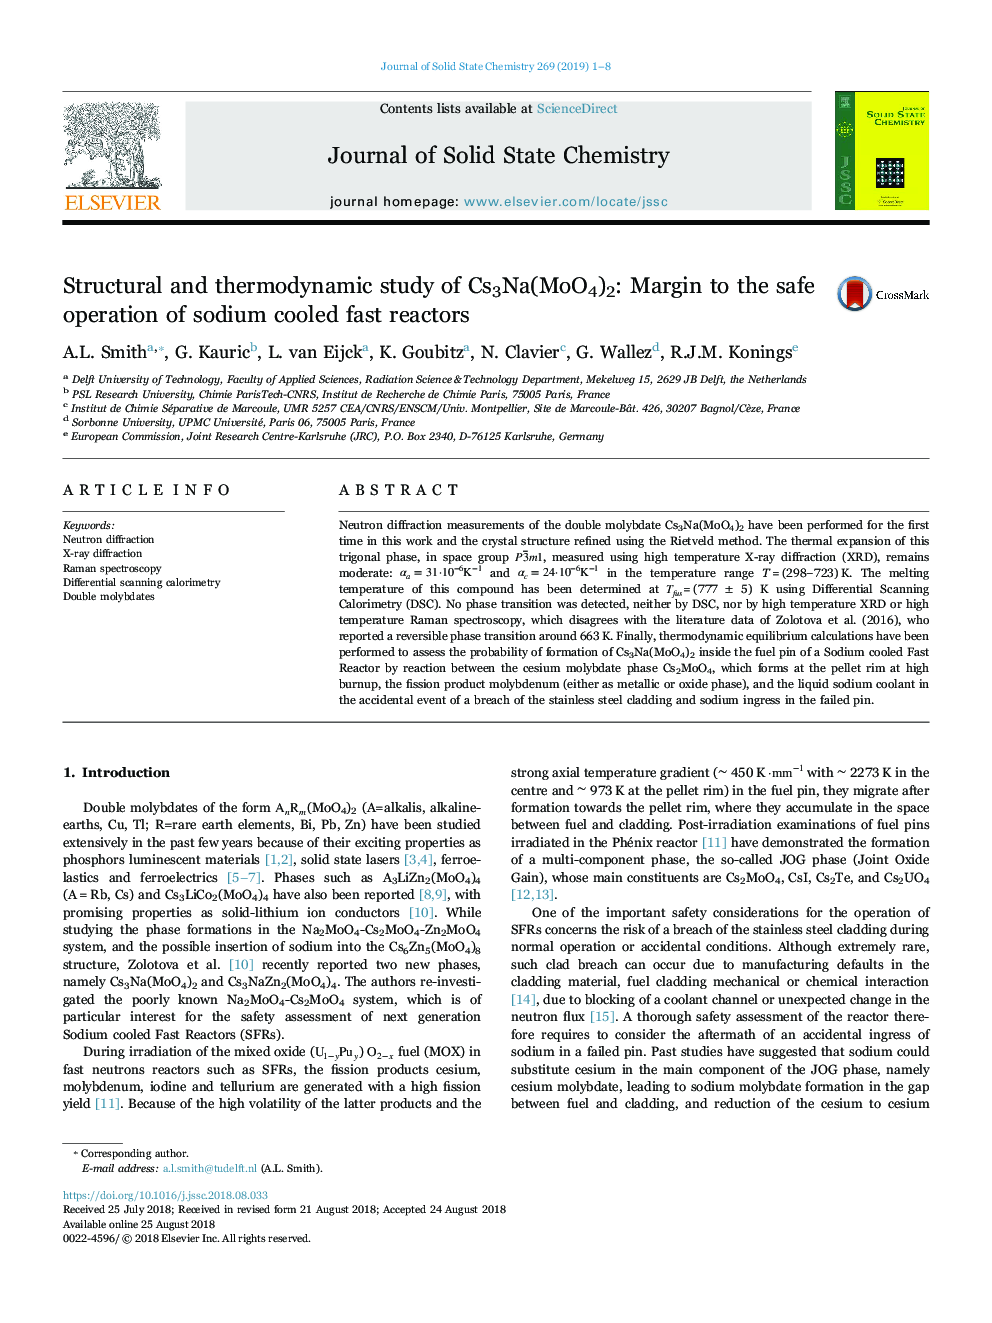 Structural and thermodynamic study of Cs3Na(MoO4)2: Margin to the safe operation of sodium cooled fast reactors